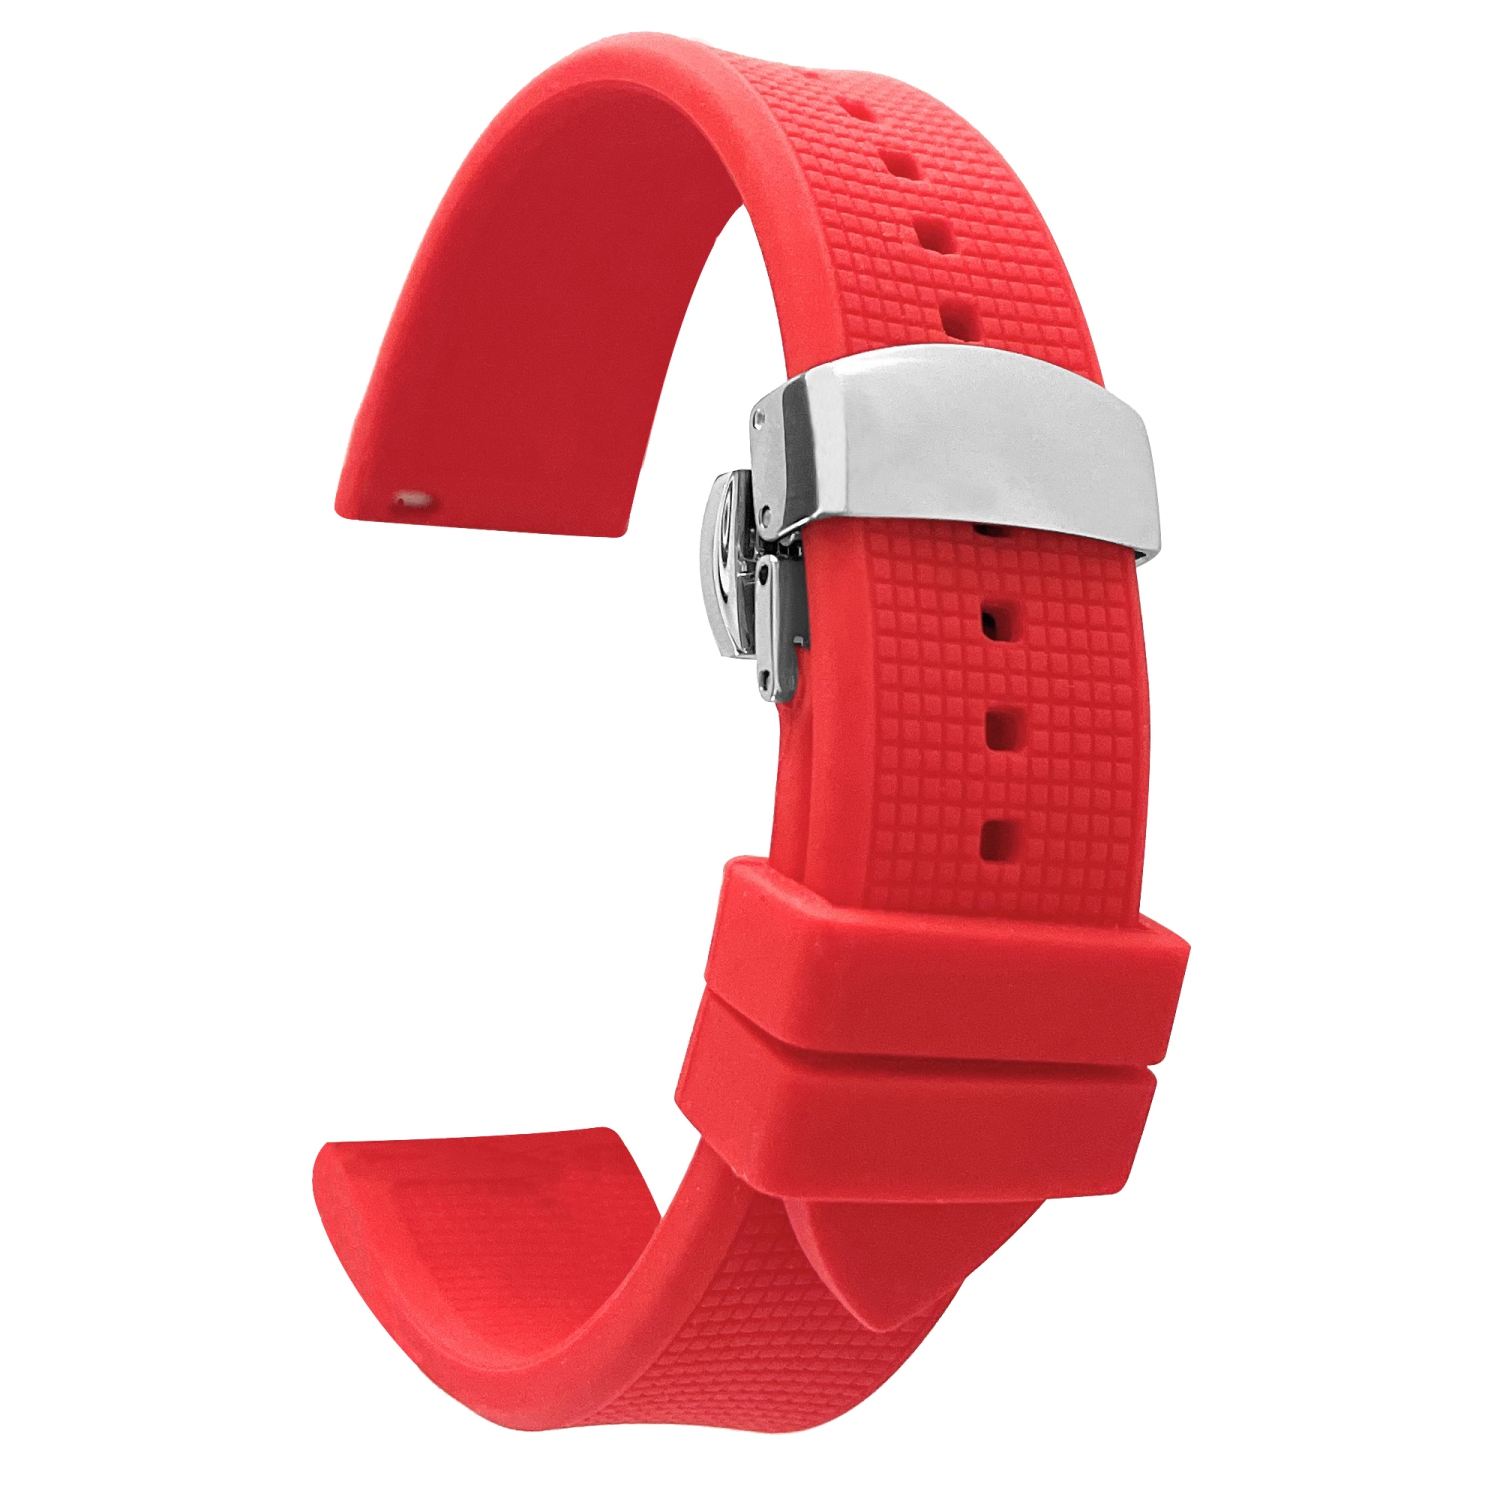 Bandini Waterproof Soft Rubber Silicone Deployment Smart Watch Band Strap For Samsung Galaxy Watch 46mm, Galaxy Watch 3 (45mm), Gear S3 Classic & Frontier - 22mm, Red